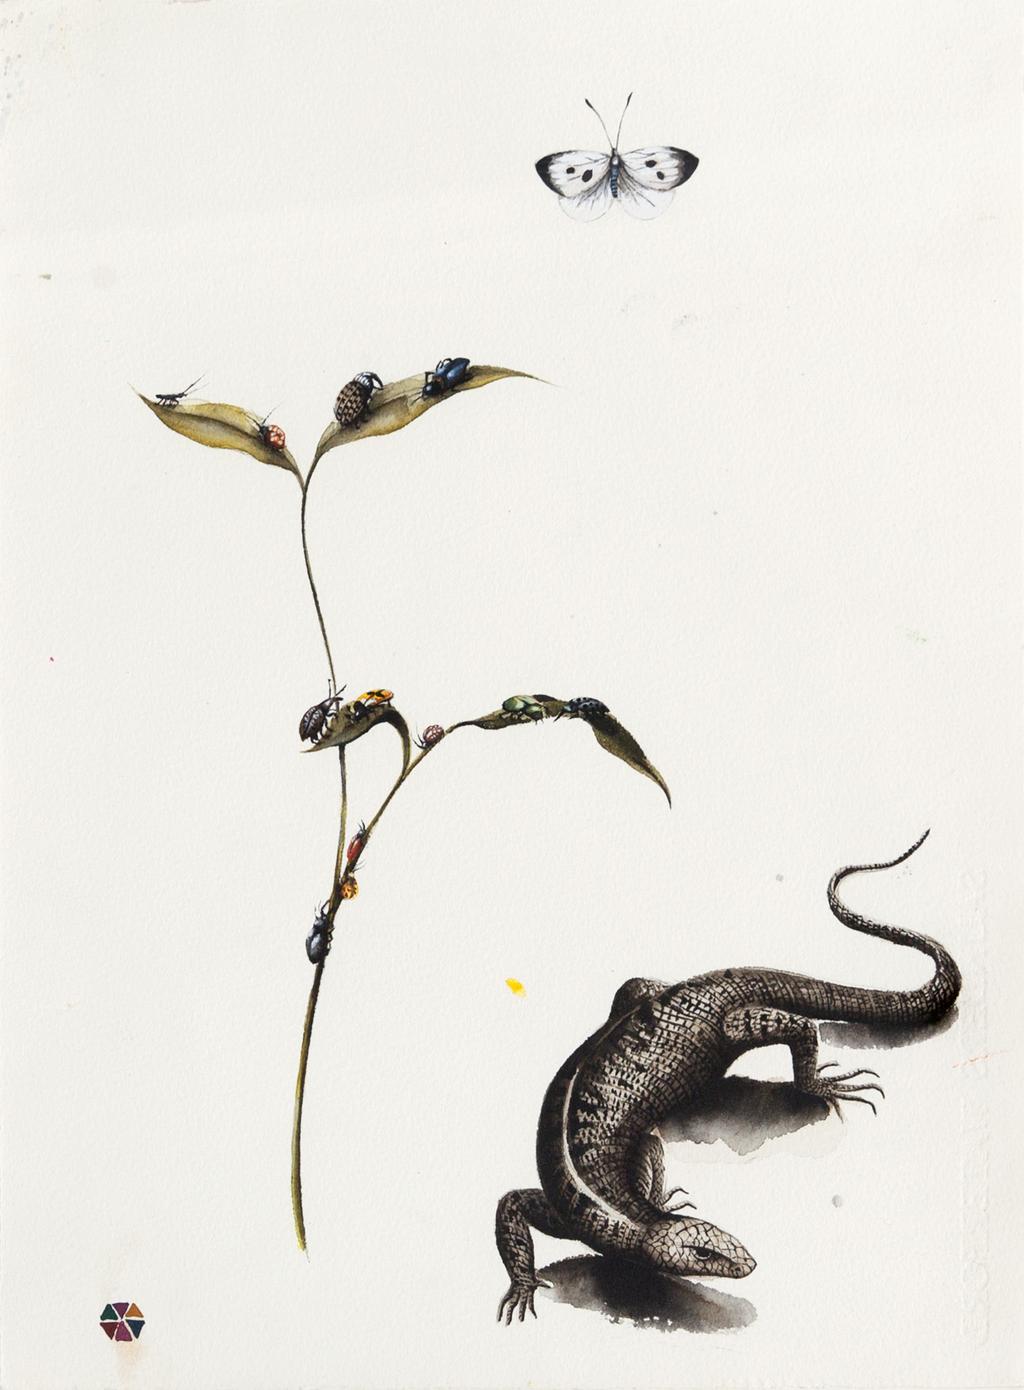 Lizard and insects watercolour on